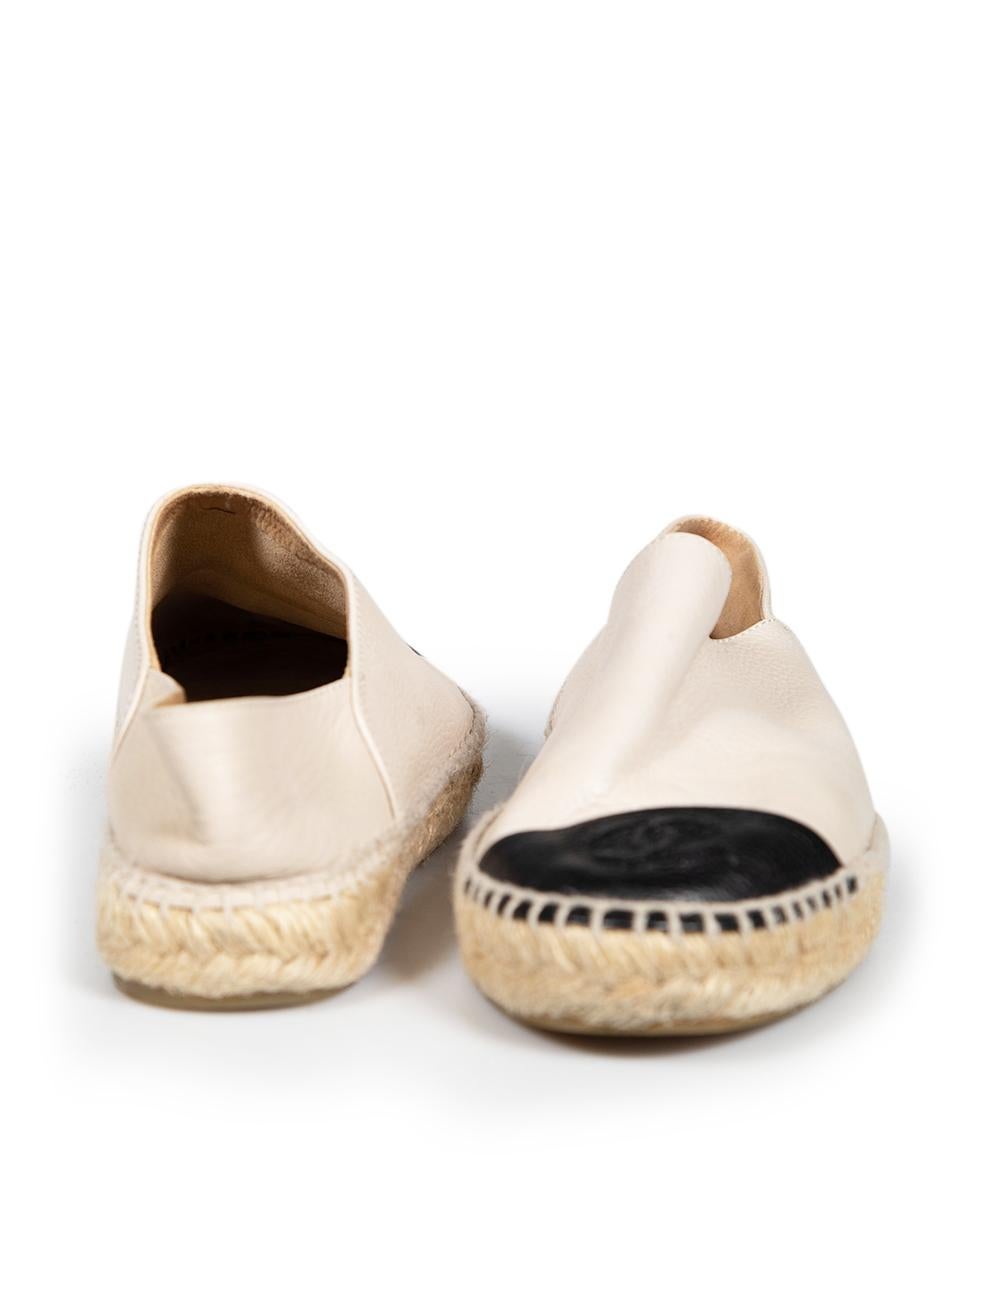 Chanel Beige Leather CC Cap Toe Espadrilles Flats Size IT 38 In Good Condition For Sale In London, GB